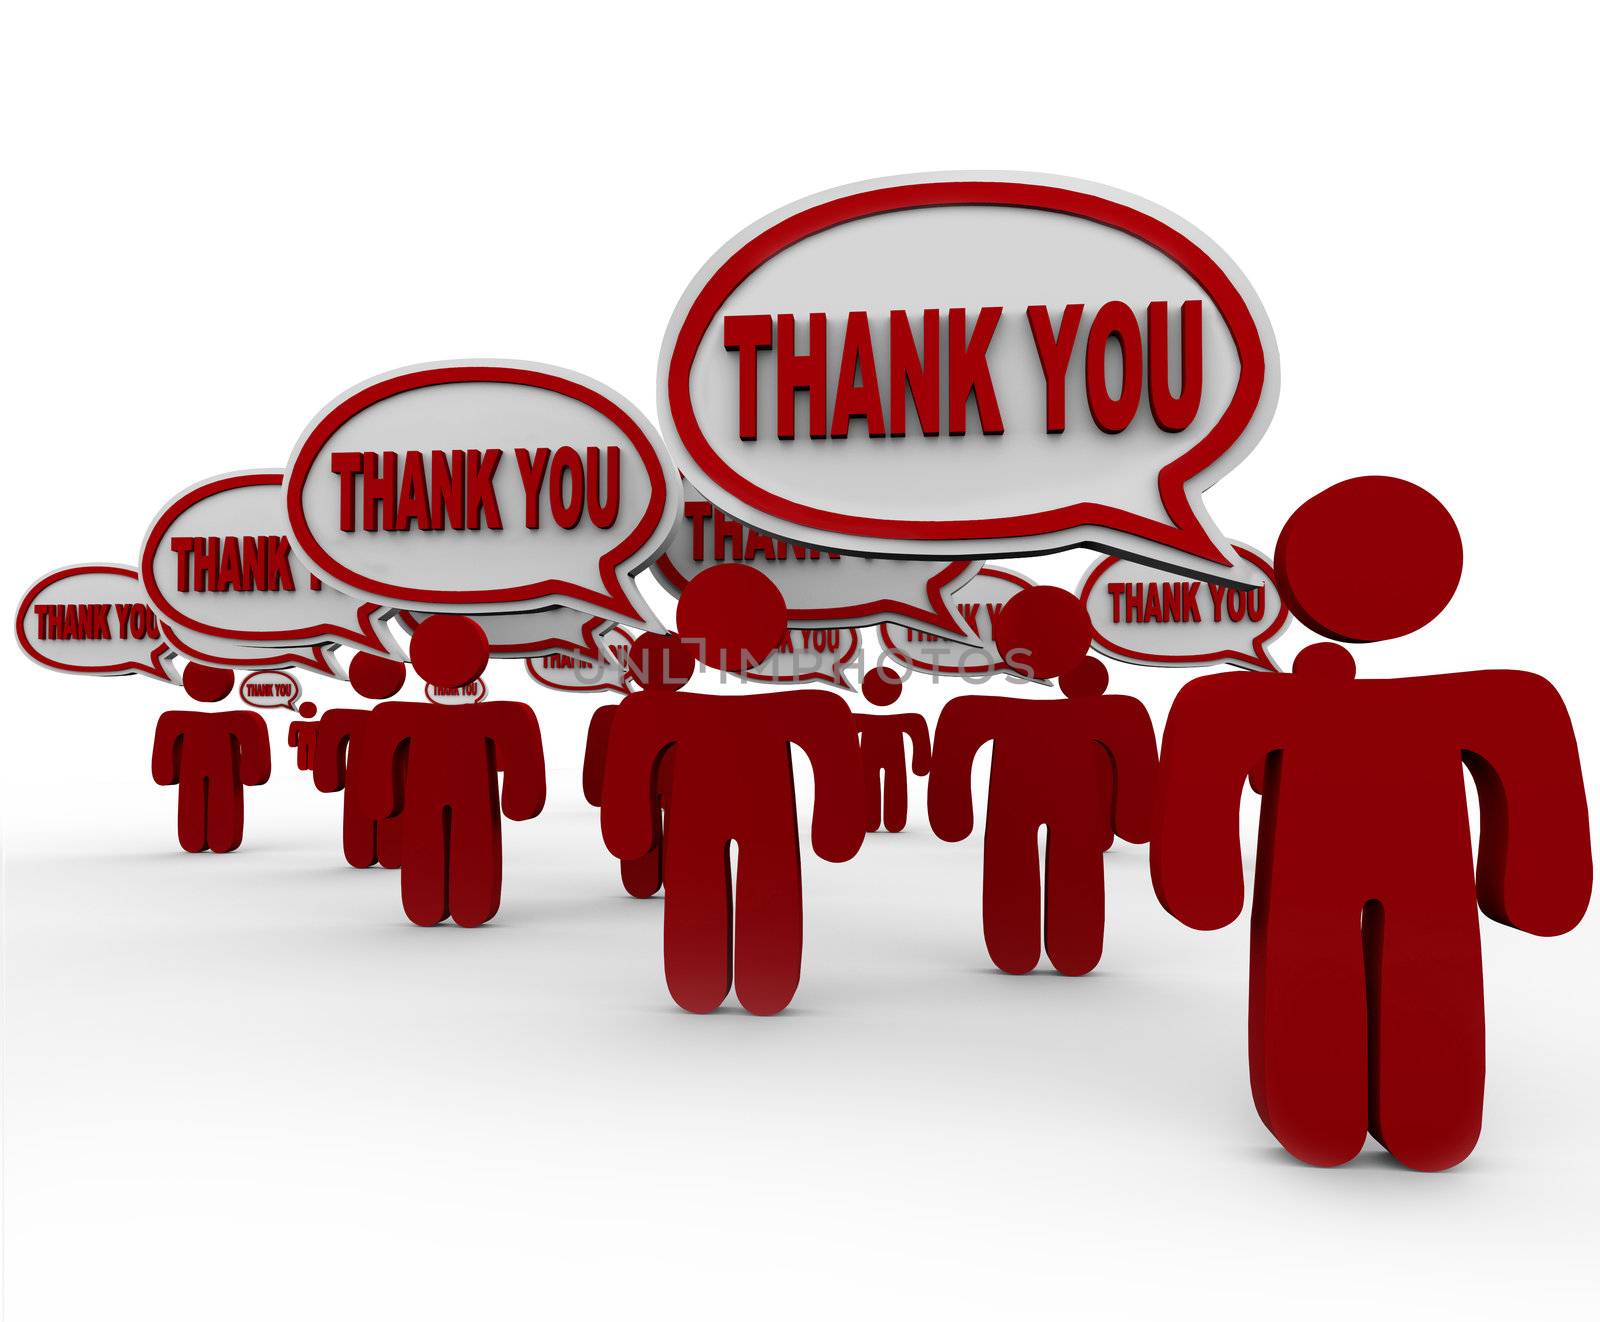 Many people, customers, neighbors or community members say Thank You in speech bubbles to share their appreciation or thankfulness for your work, gift, efforts or other contribution